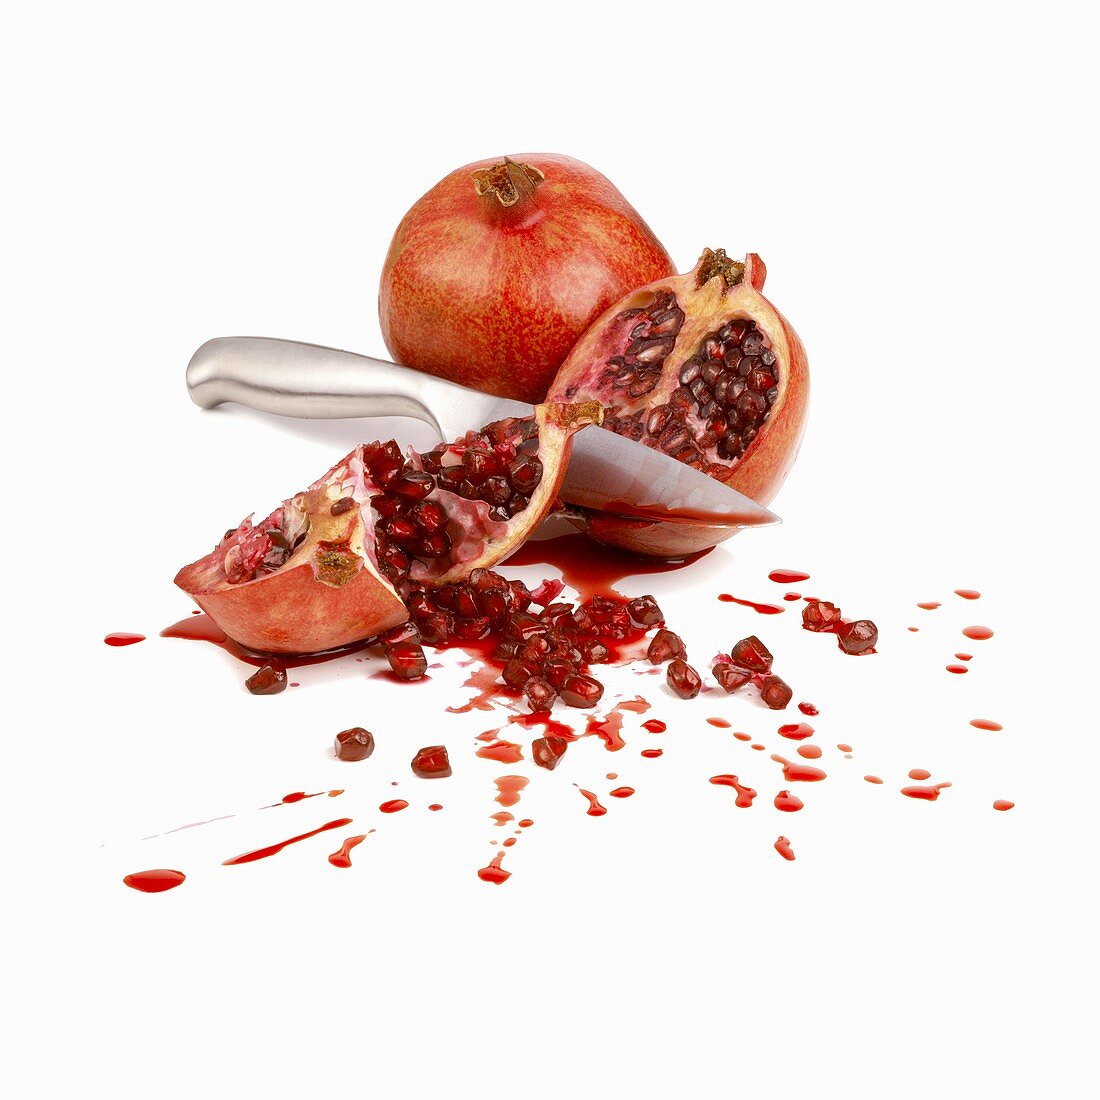 Whole pomegranate and pomegranate, cut open with knife